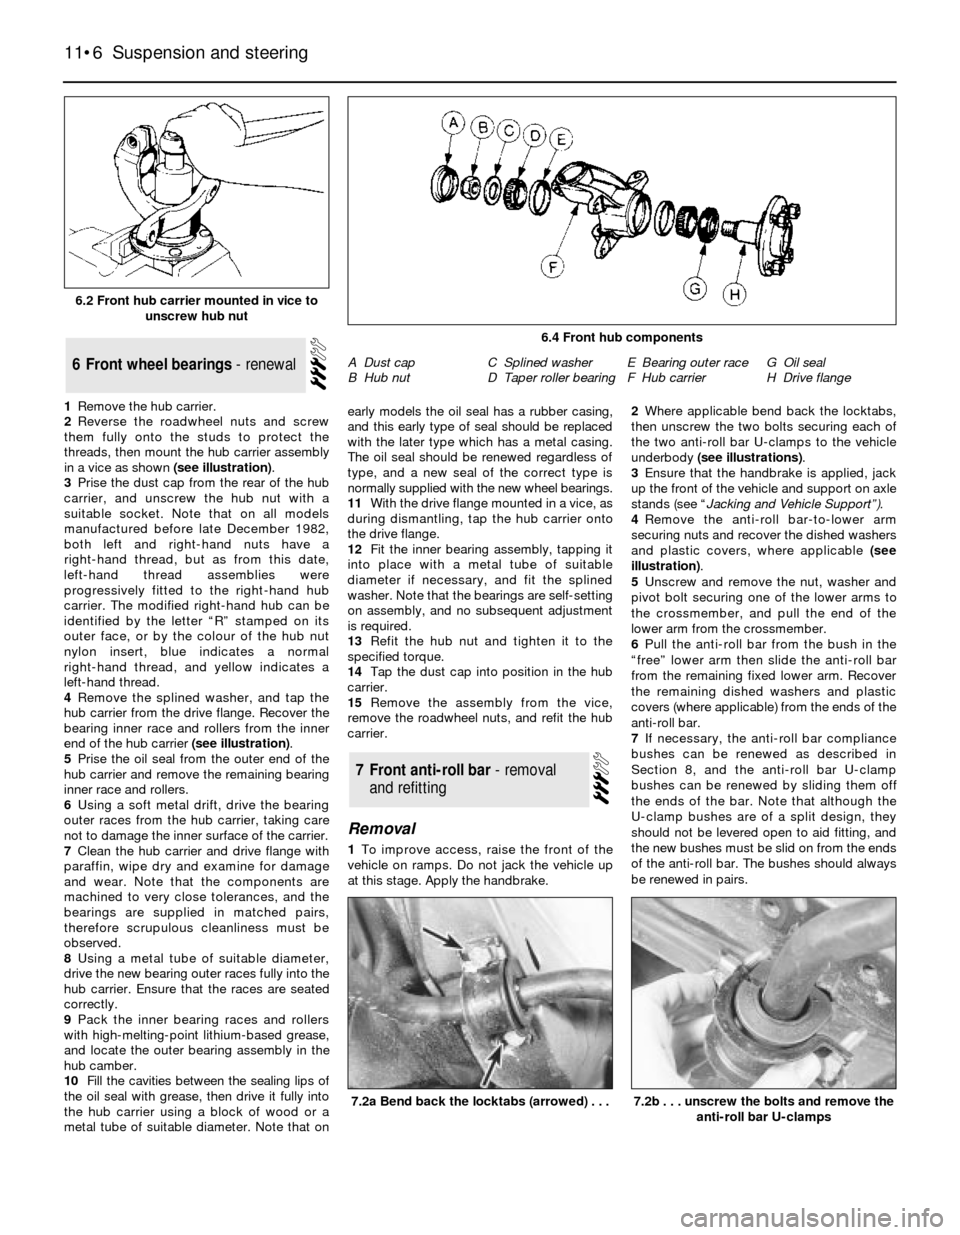 FORD SIERRA 1991 2.G Suspension And Steering Workshop Manual 1Remove the hub carrier.
2Reverse the roadwheel nuts and screw
them fully onto the studs to protect the
threads, then mount the hub carrier assembly
in a vice as shown (see illustration).
3Prise the d